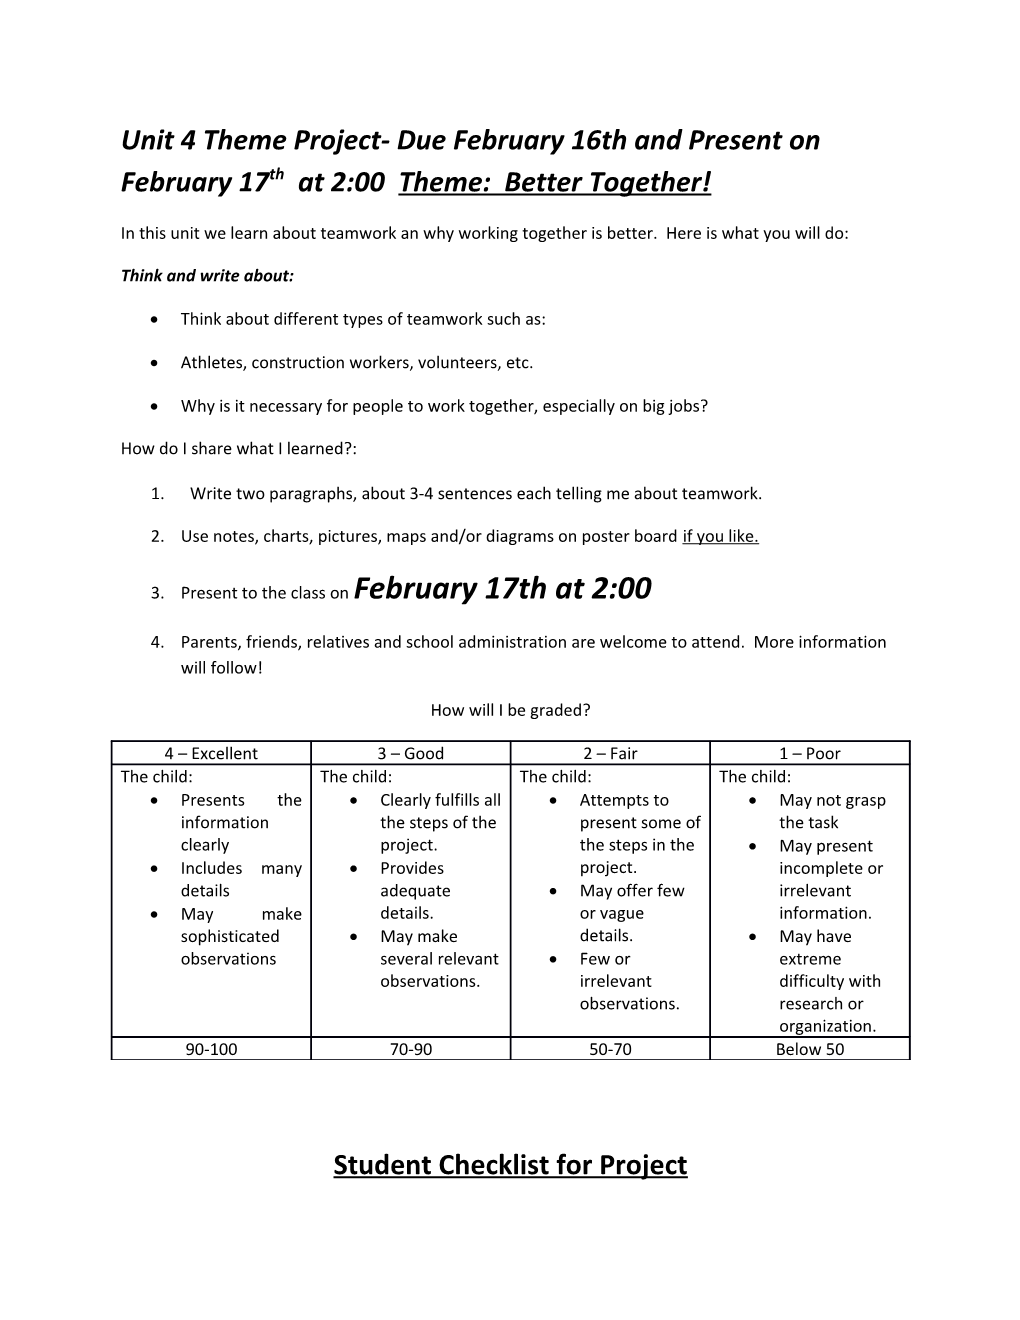 Unit 4 Theme Project- Due February 16Th and Present on February 17Th at 2:00 Theme: Better